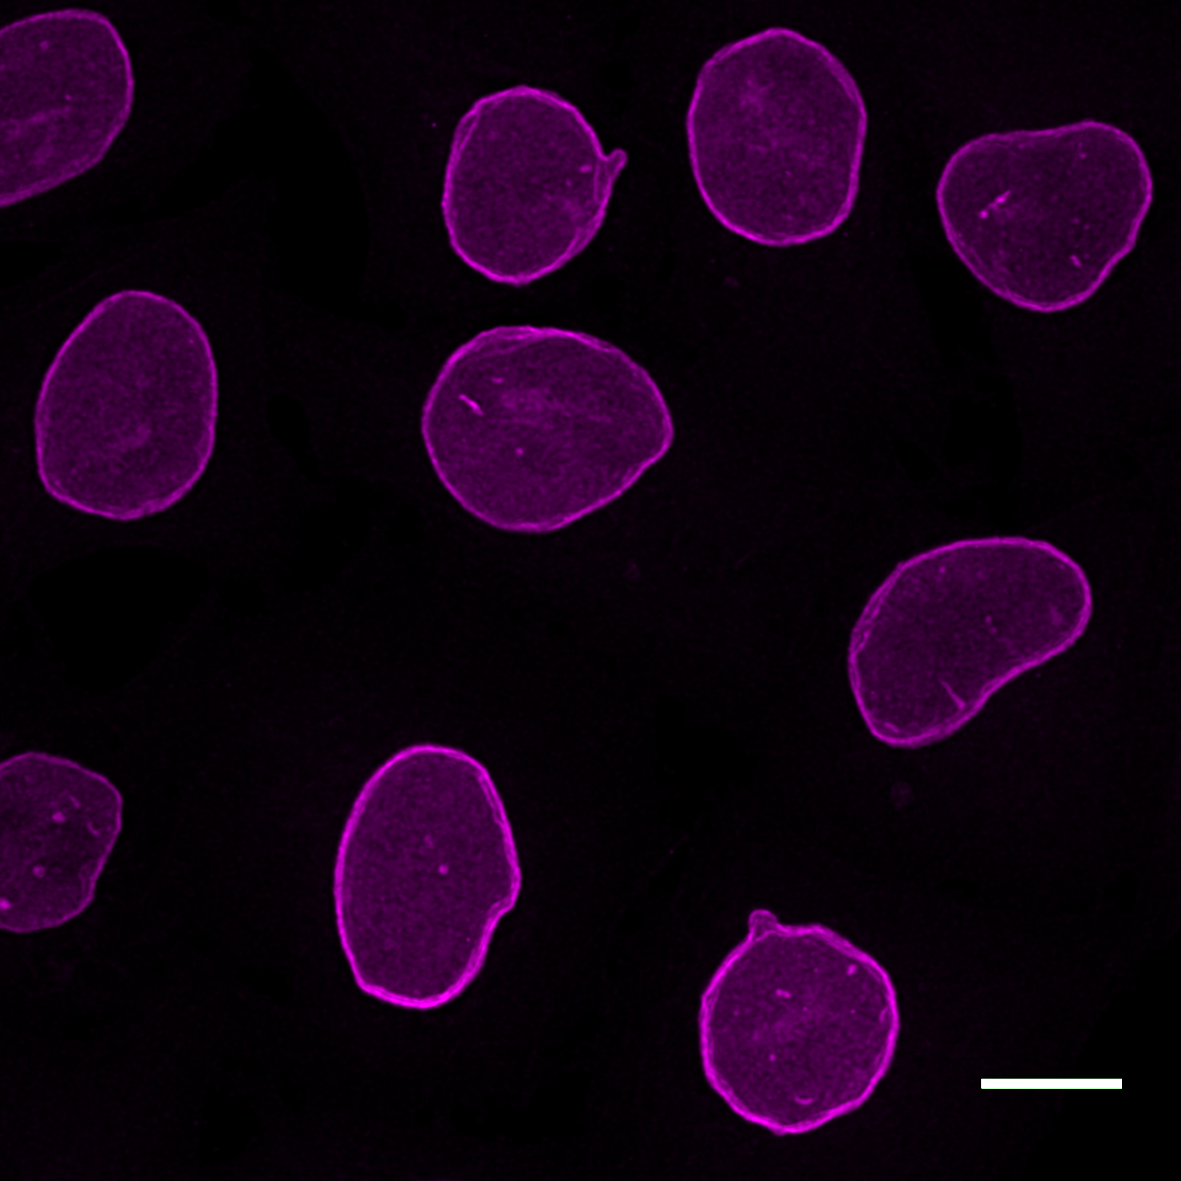 HeLa cells were immunostained with mouse IgG3 anti-Lamin A/C antibody +Nano-Secondary alpaca anti-mouse IgG3 Alexa Fluor® 647 (magenta). Scale bar, 10 µm. Images were recorded at the Core Facility Bioimaging at the Biomedical Center, LMU Munich.